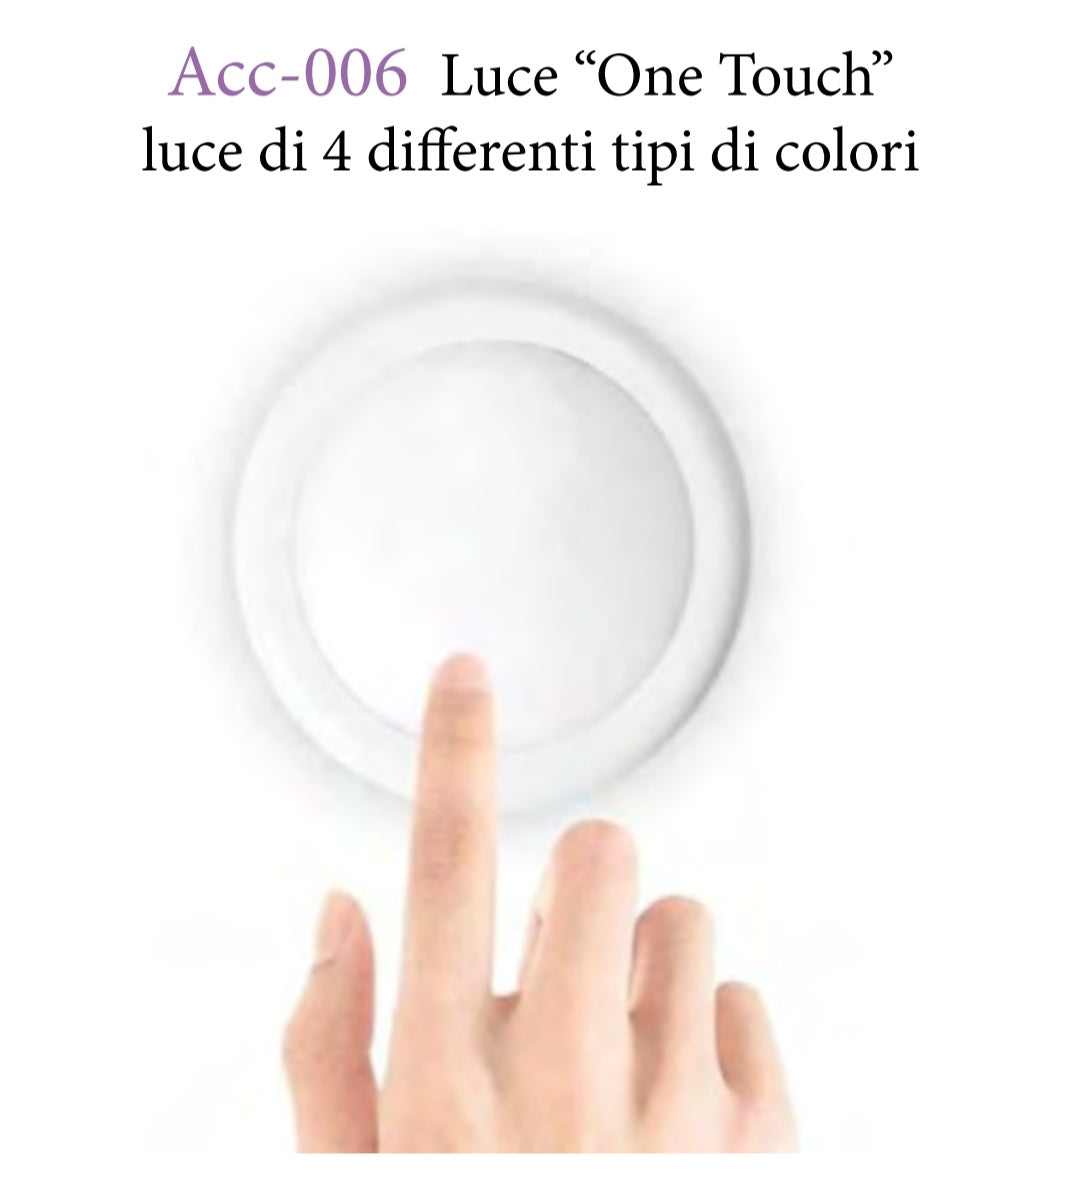 Luce "One Touch" - ACC006 - Idee per creare